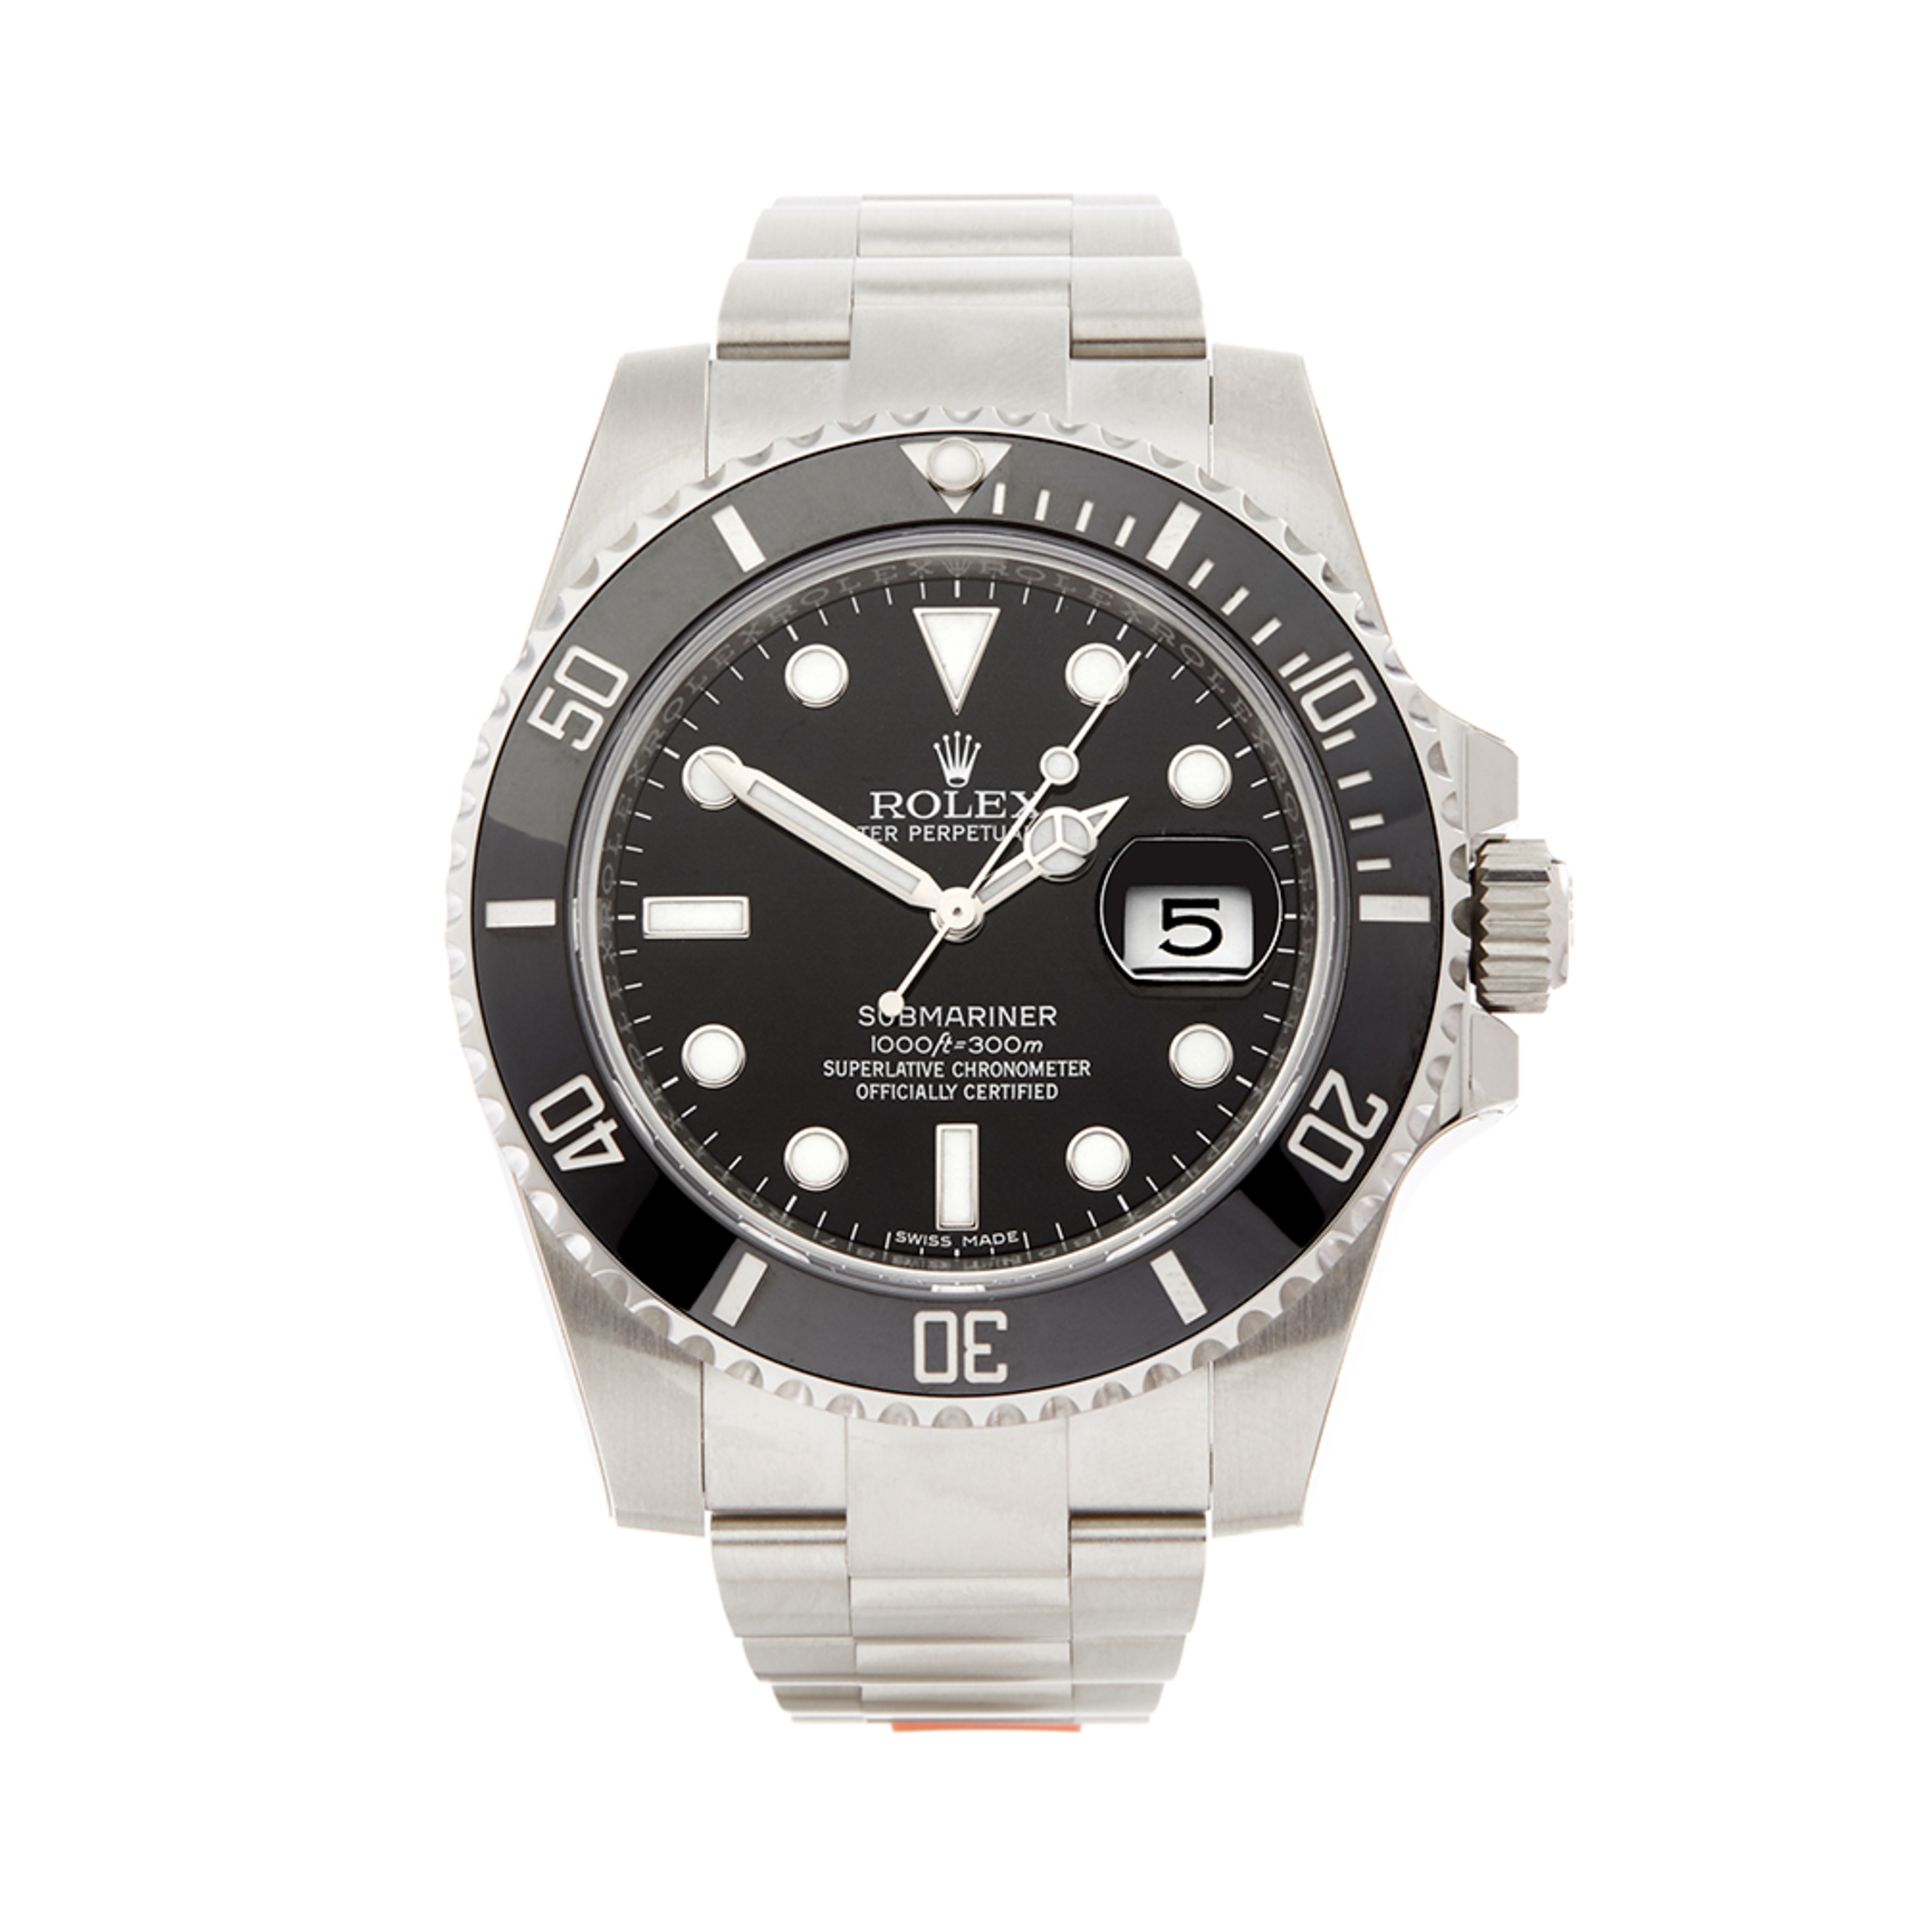 Rolex Submariner Stainless Steel - 116610LN - Image 2 of 7